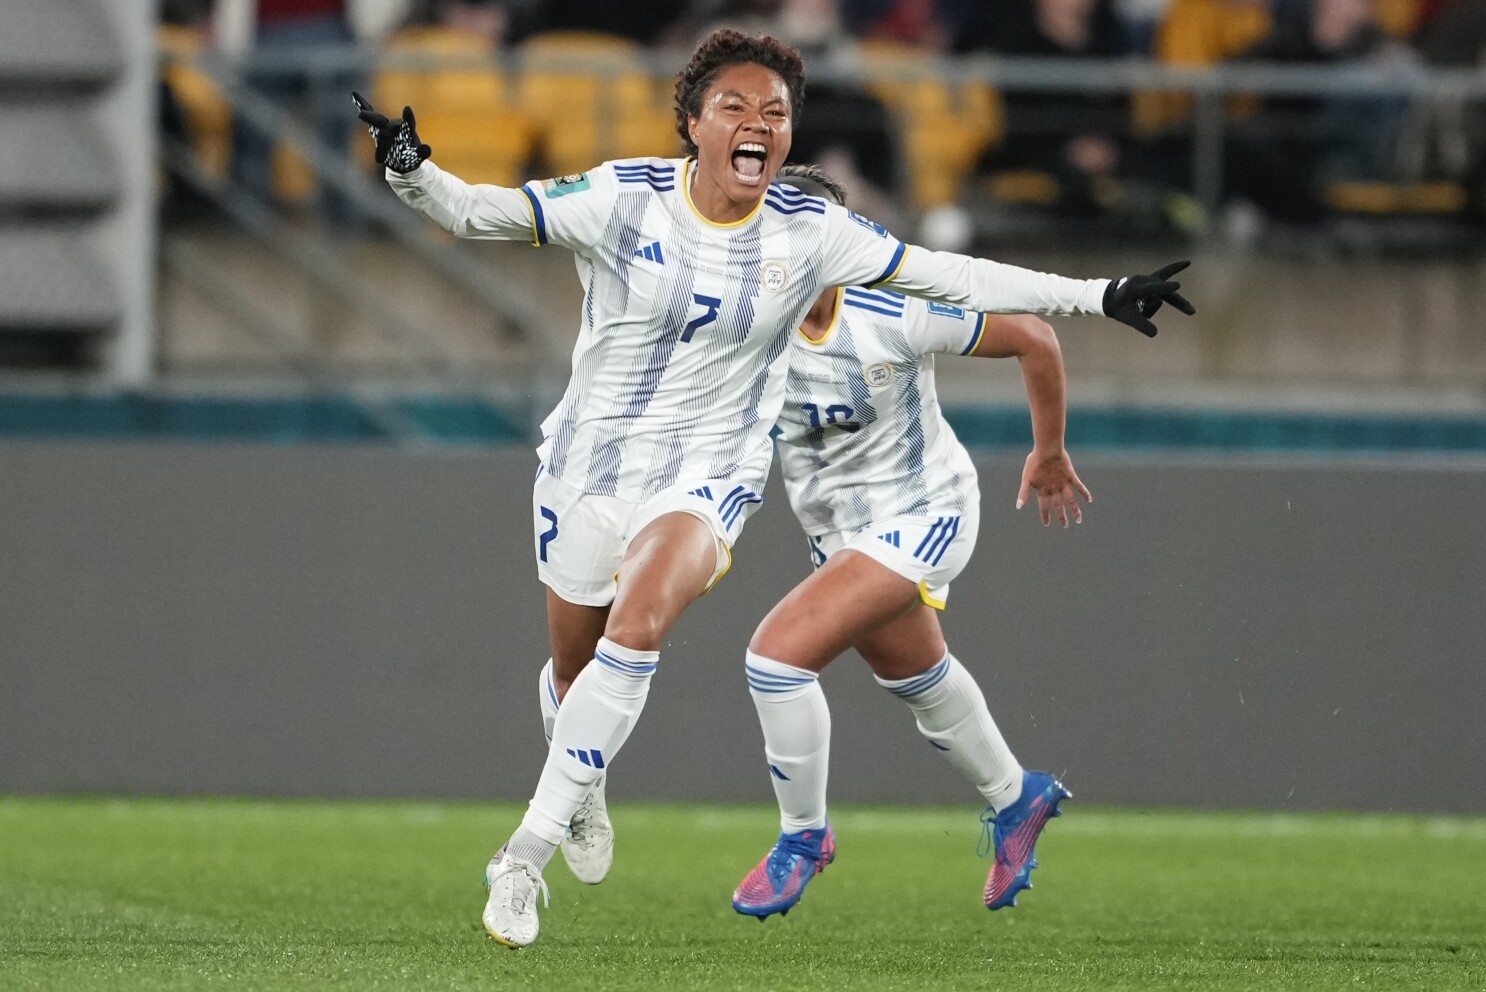 Philippines defeat New Zealand 1-0 to win the Women's World Cup for the first time